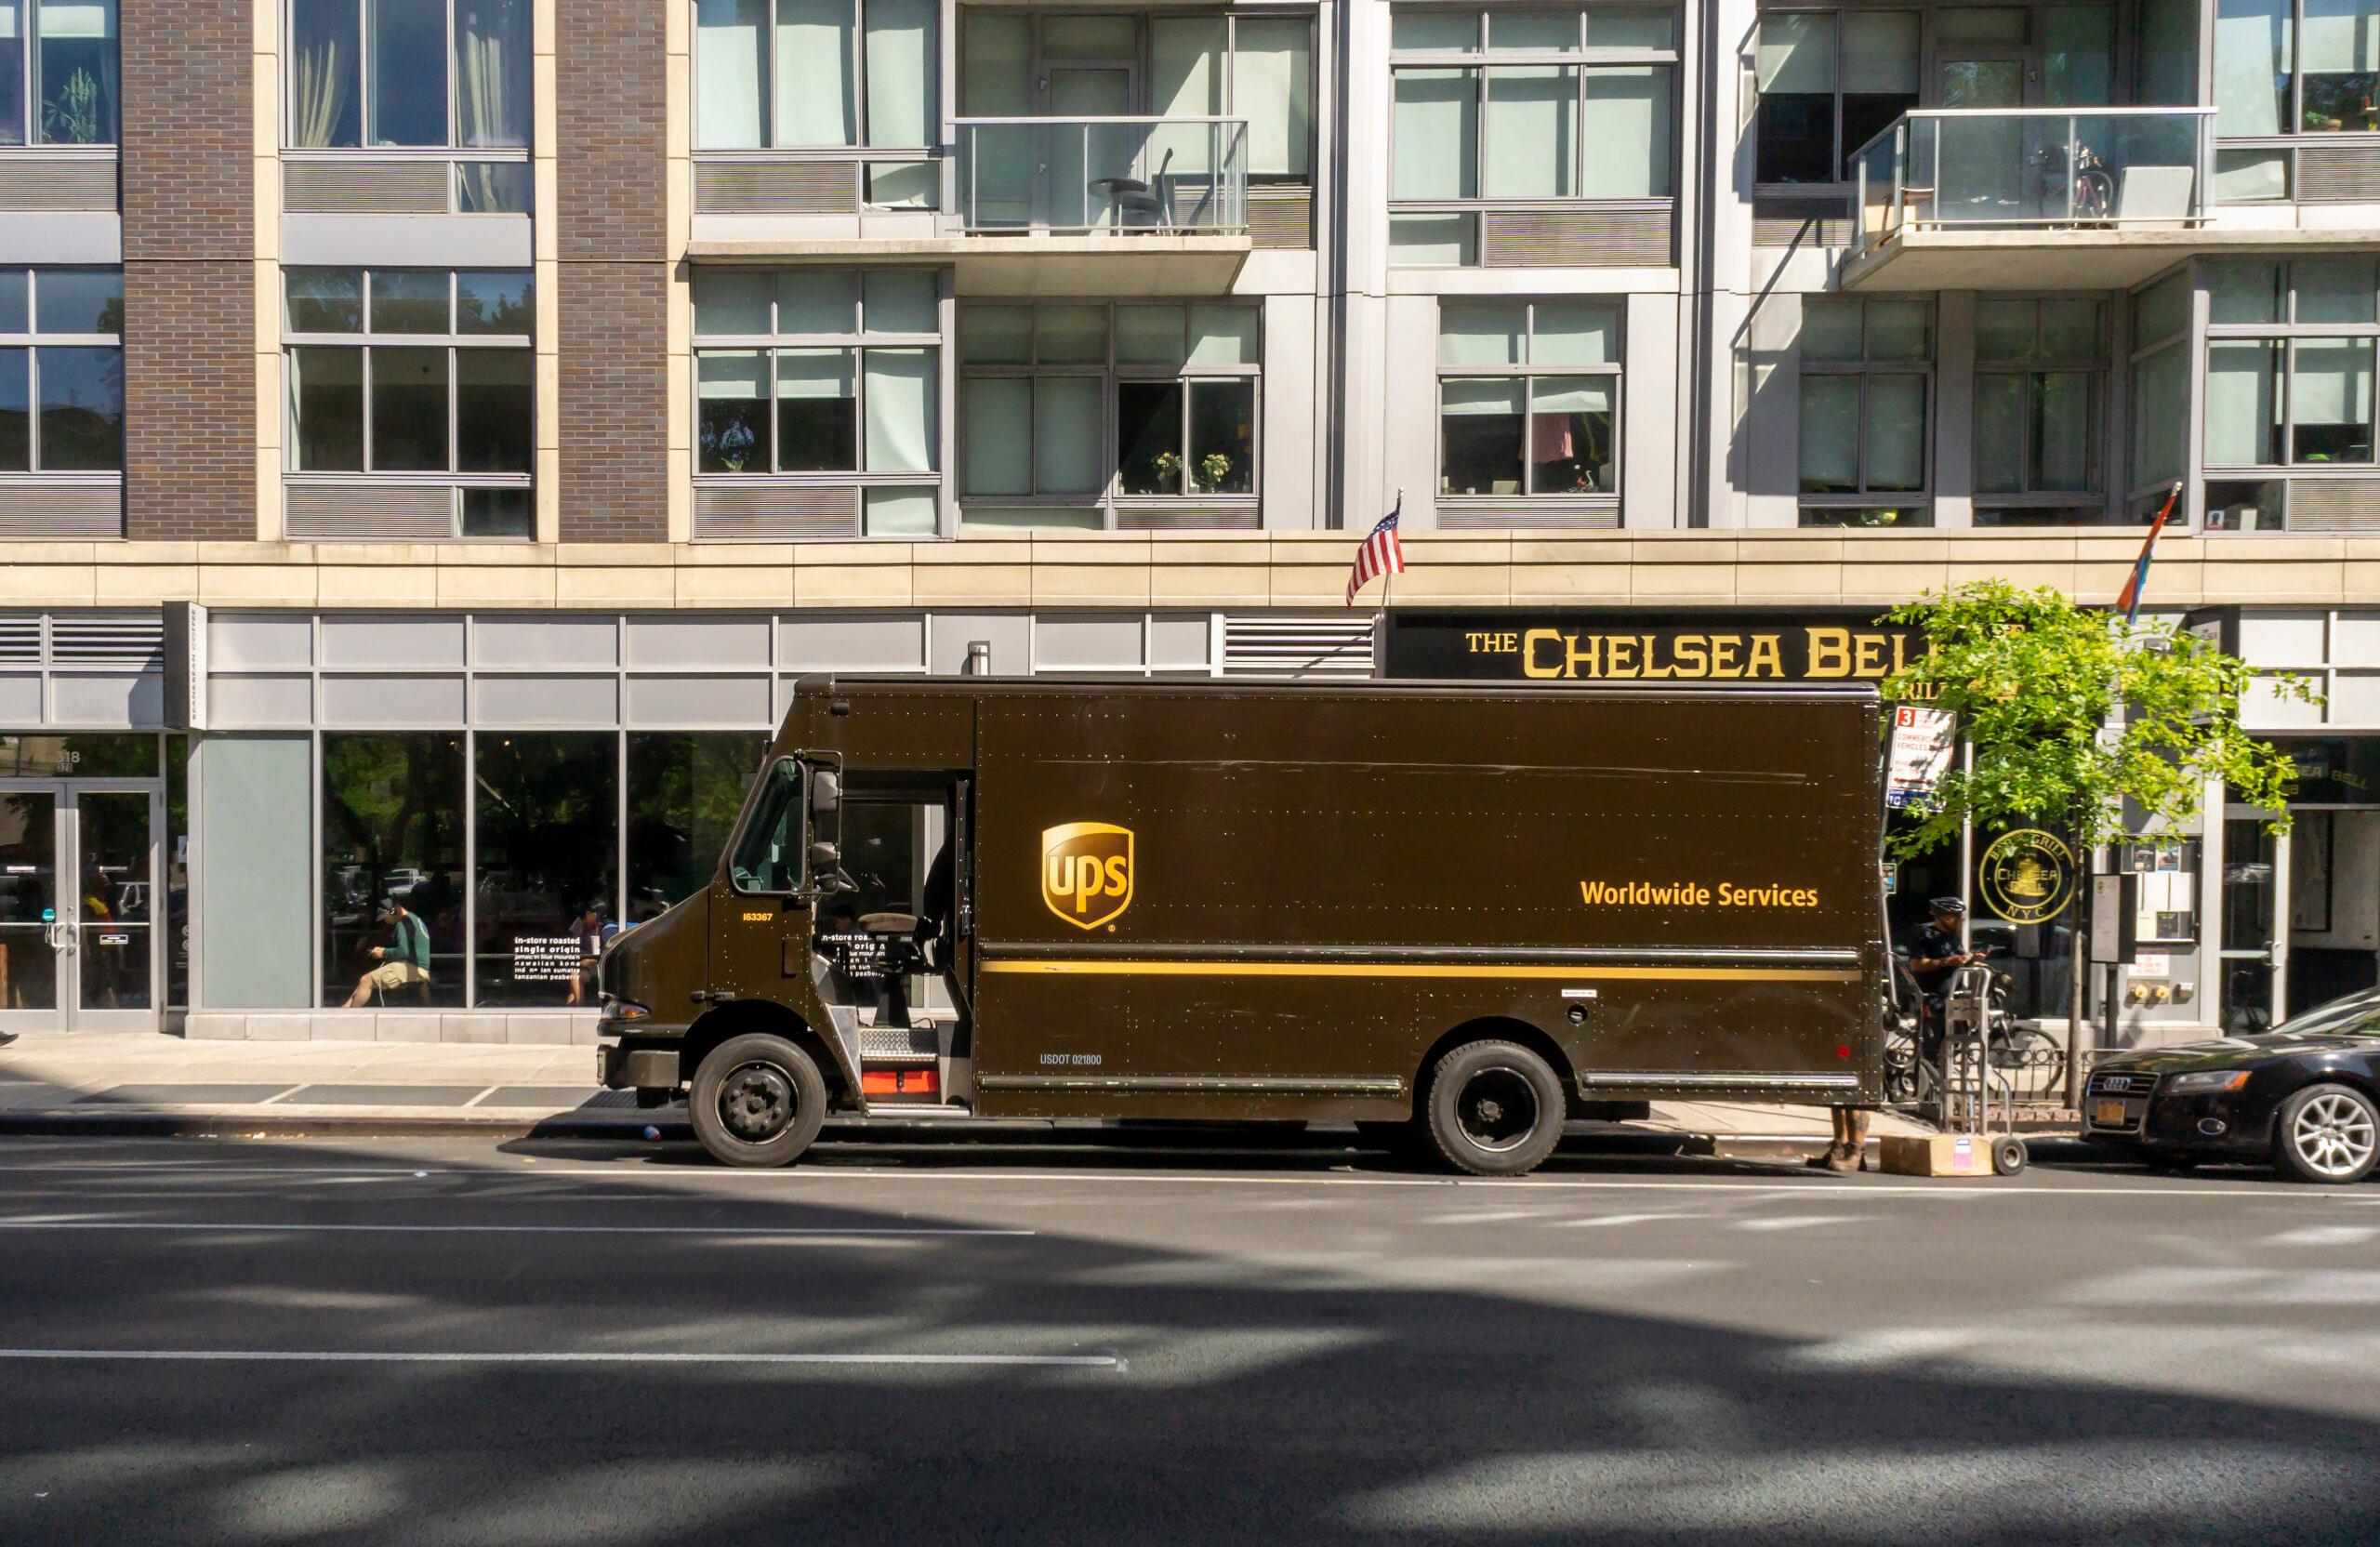 UPS delivery truck in New York